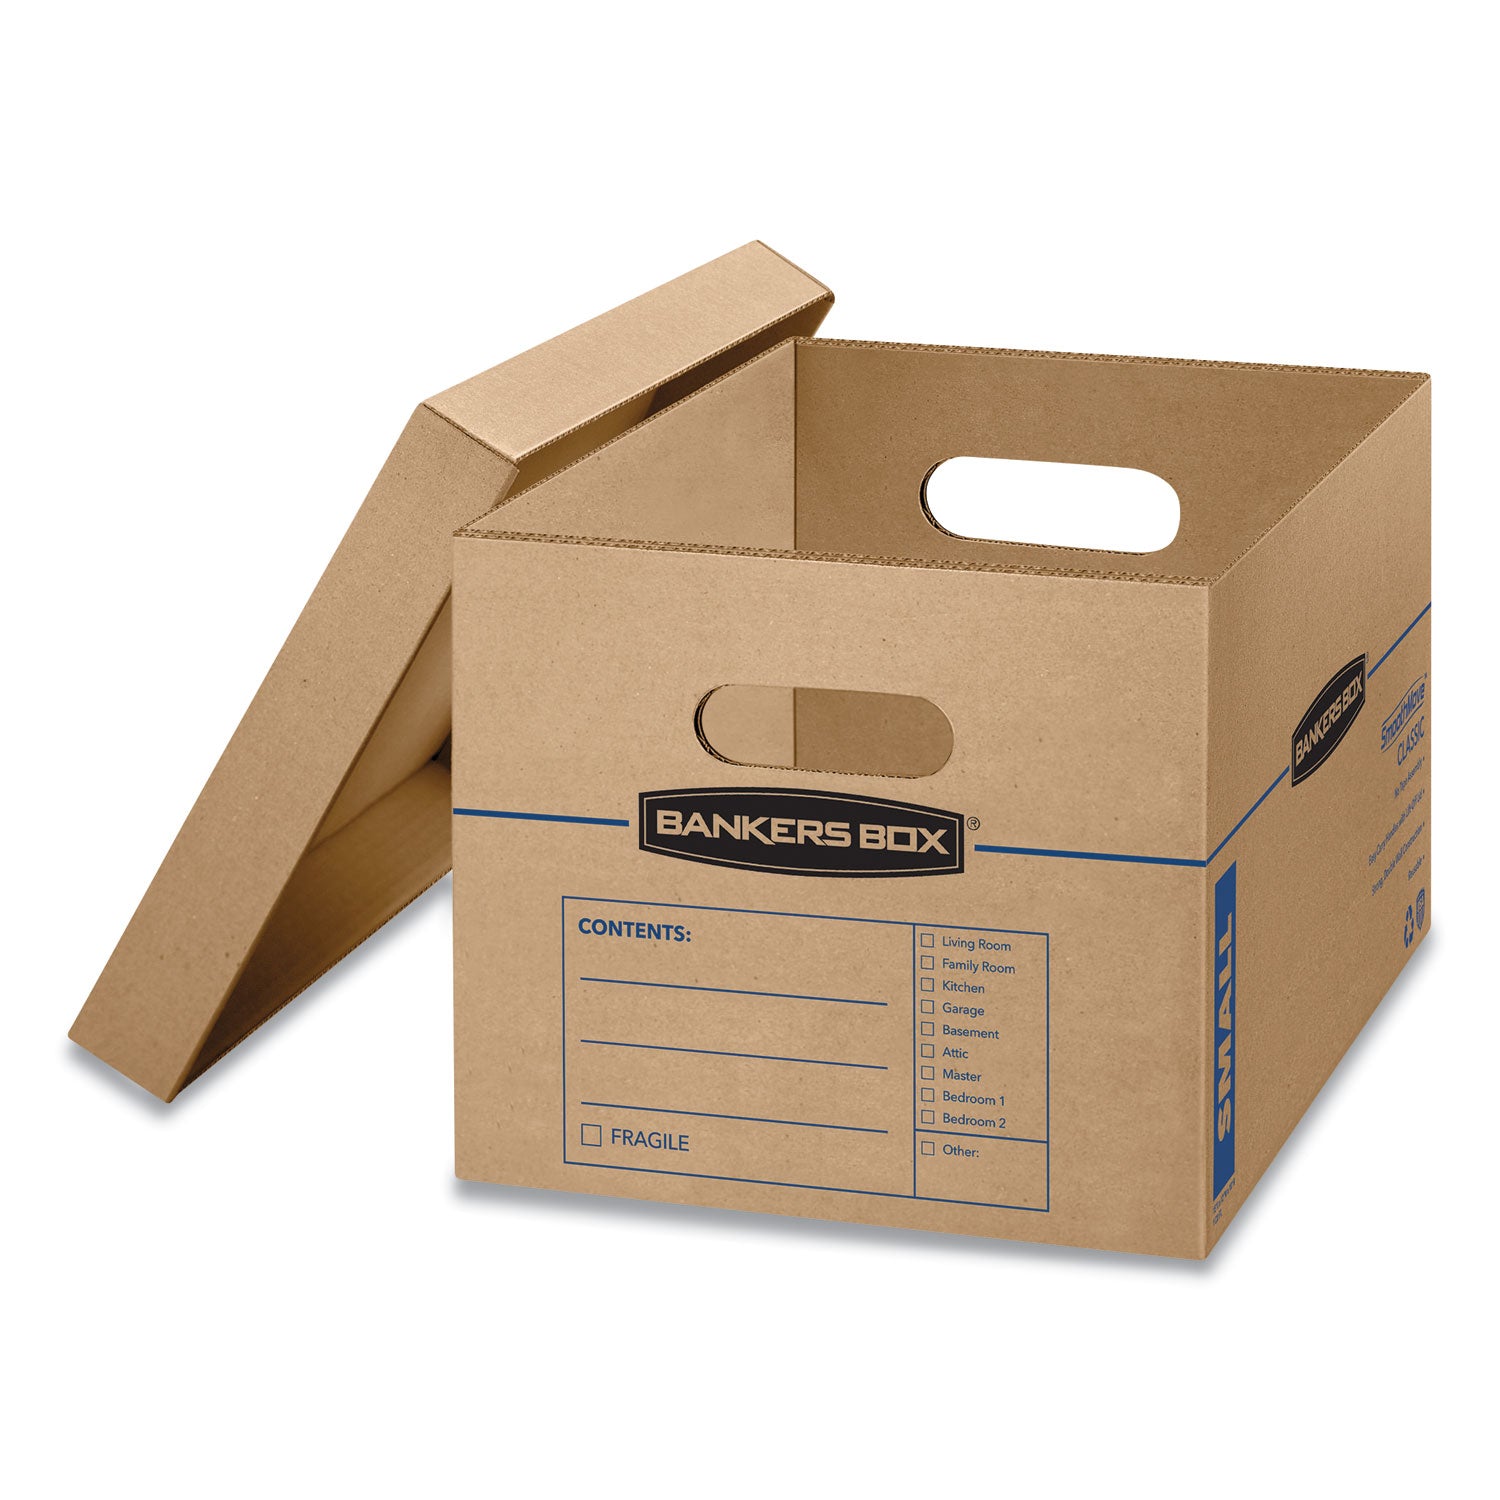 SmoothMove Classic Moving/Storage Boxes, Half Slotted Container (HSC), Small, 12" x 15" x 10", Brown/Blue, 10/Carton - 